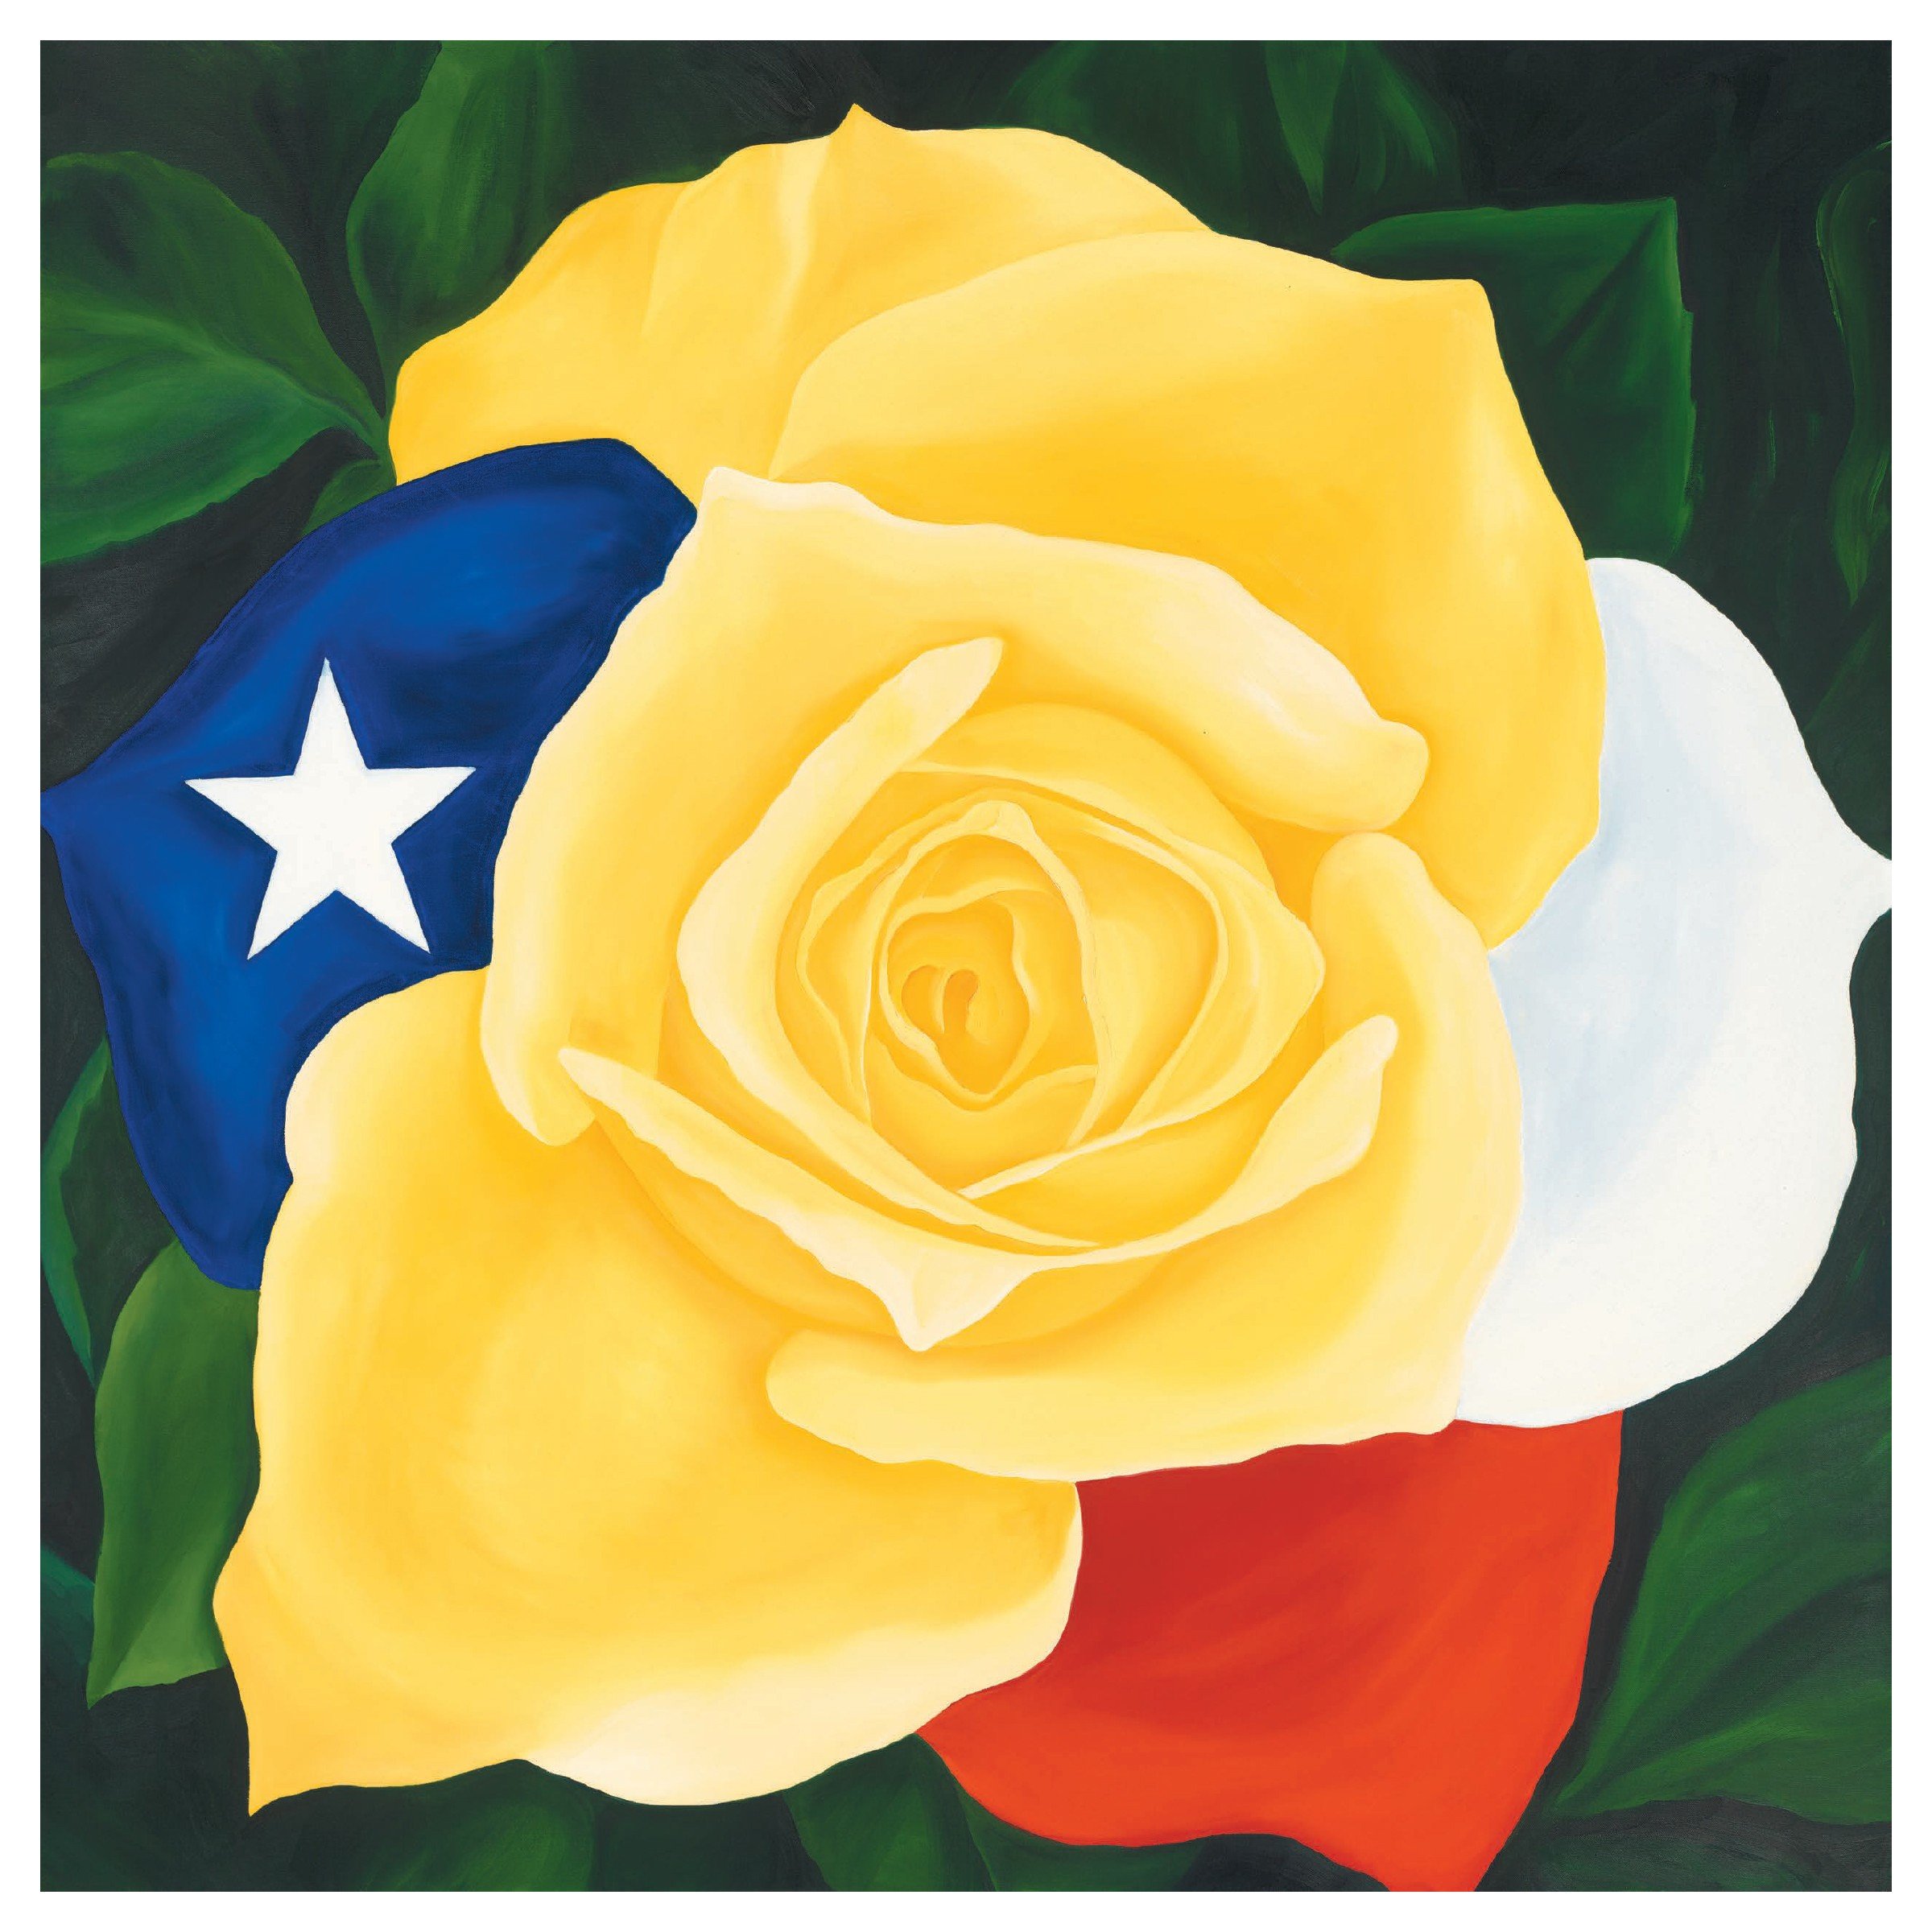 LET FREEDOM BLOOM AGAIN: YELLOW ROSE OF TEXAS